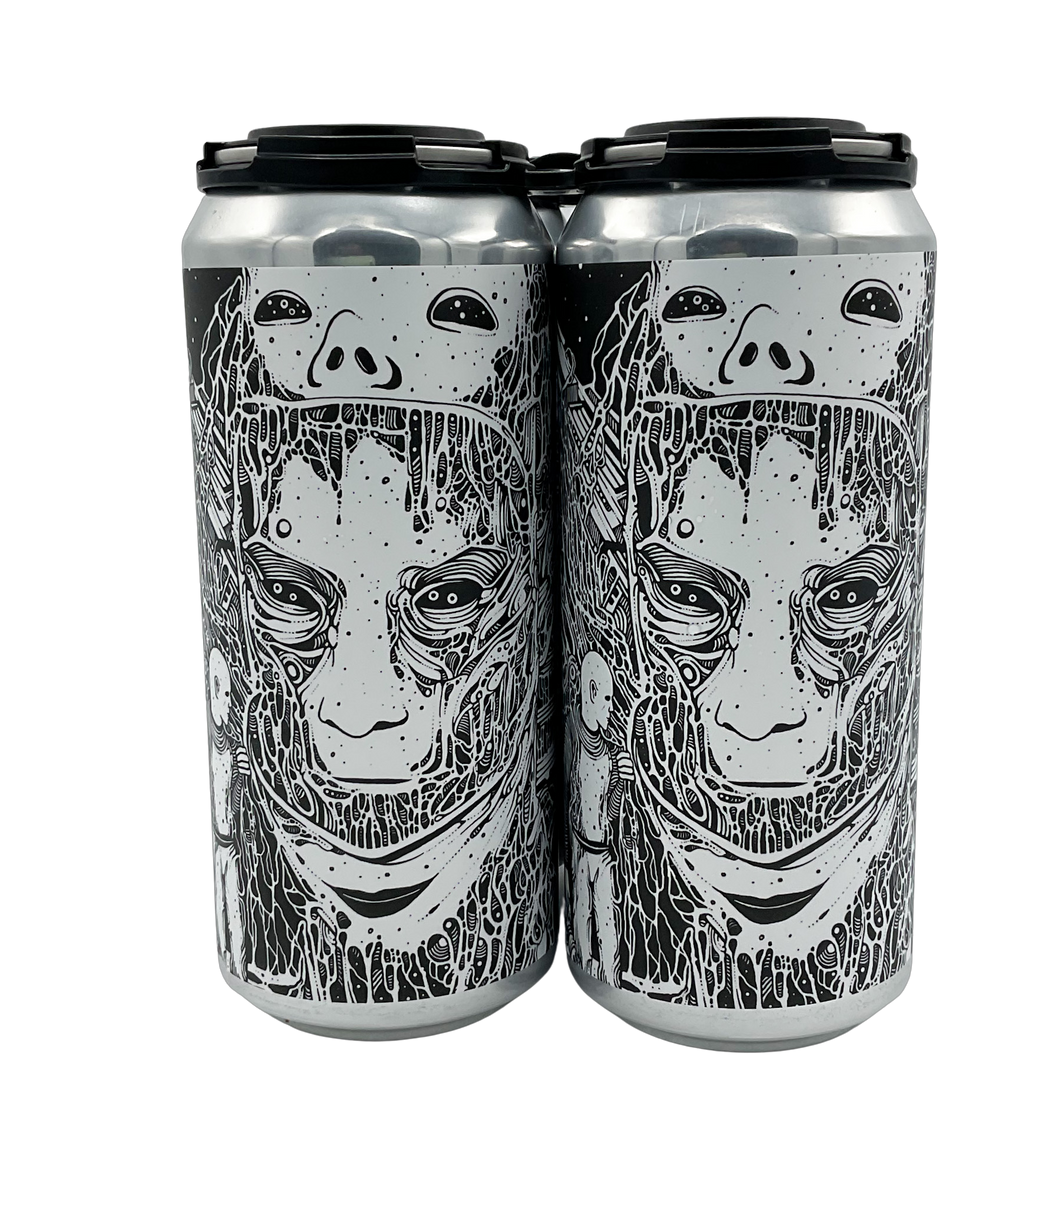 There Does Not Exist Memory Machine West Coast IPA 4pk